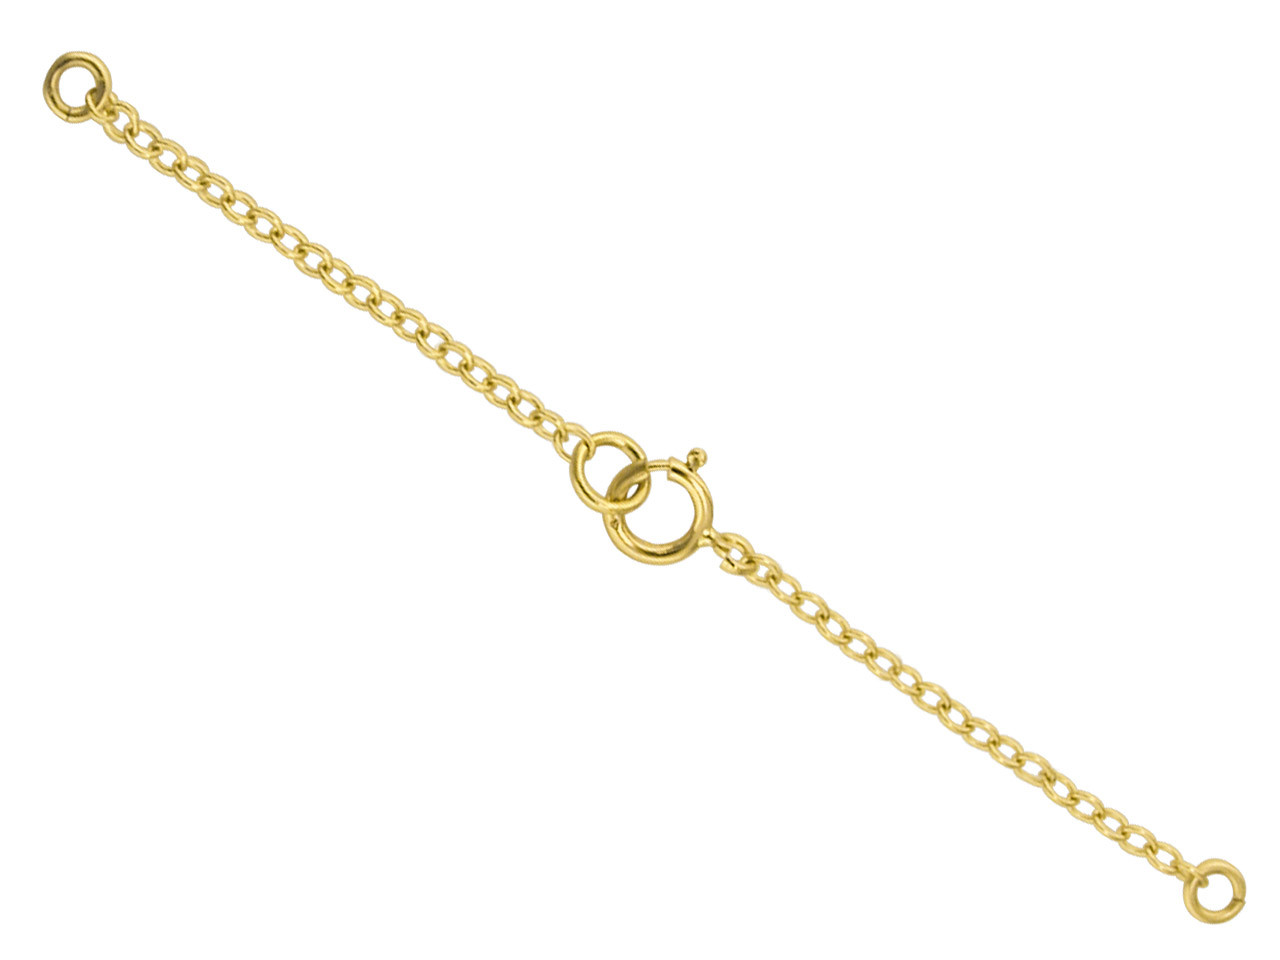 Small Safety Pin Necklace in gold with diamonds